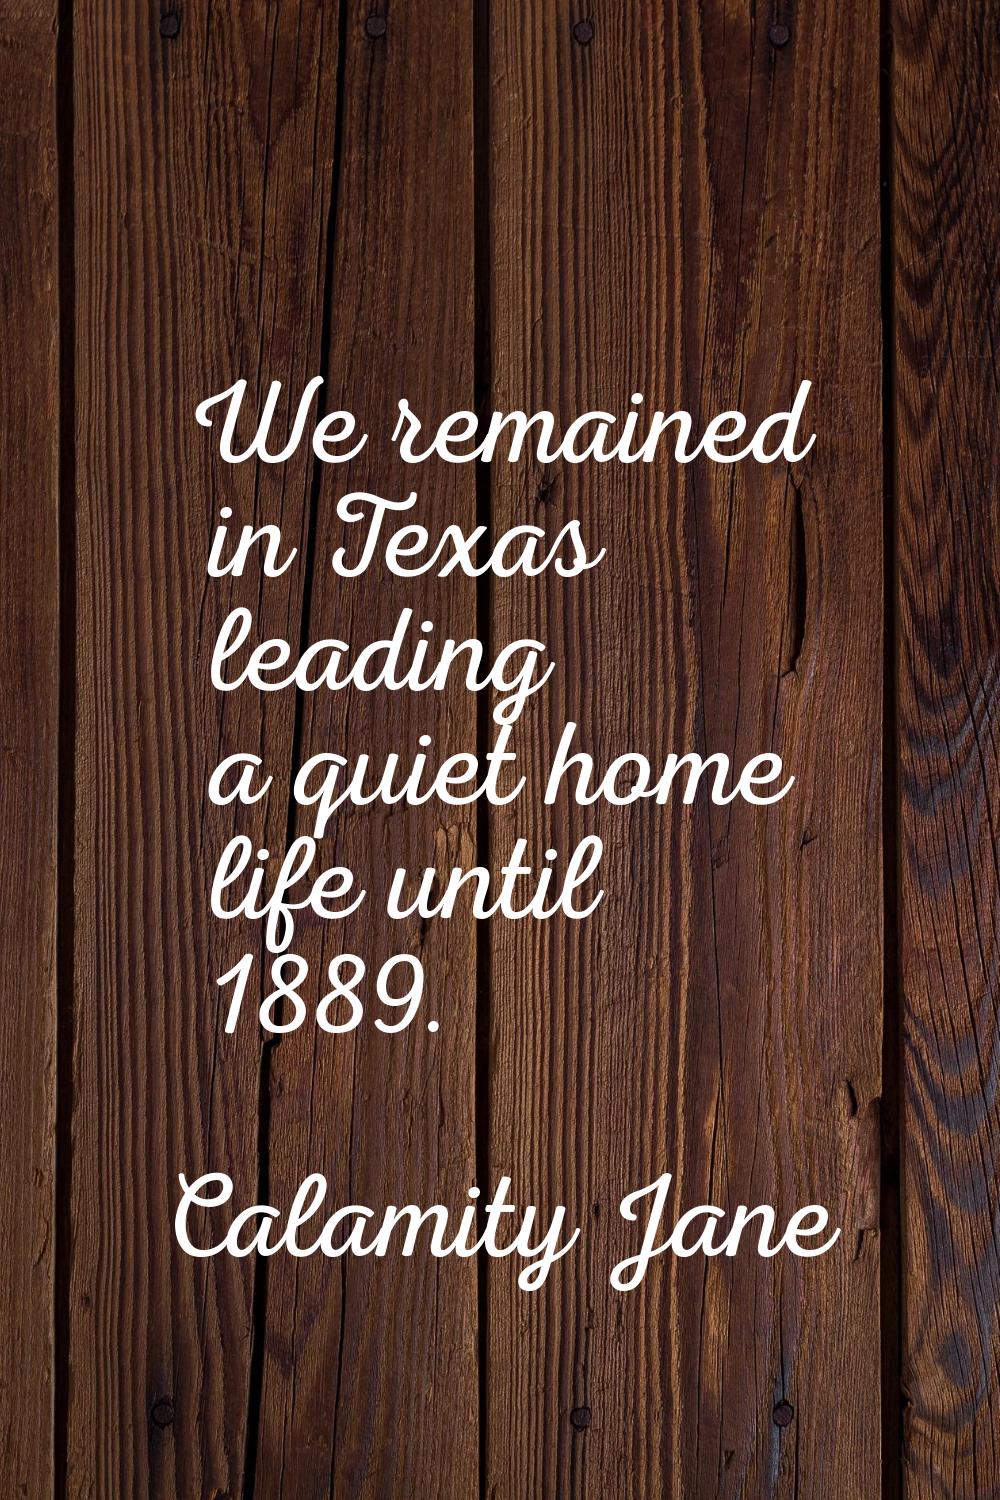 We remained in Texas leading a quiet home life until 1889.